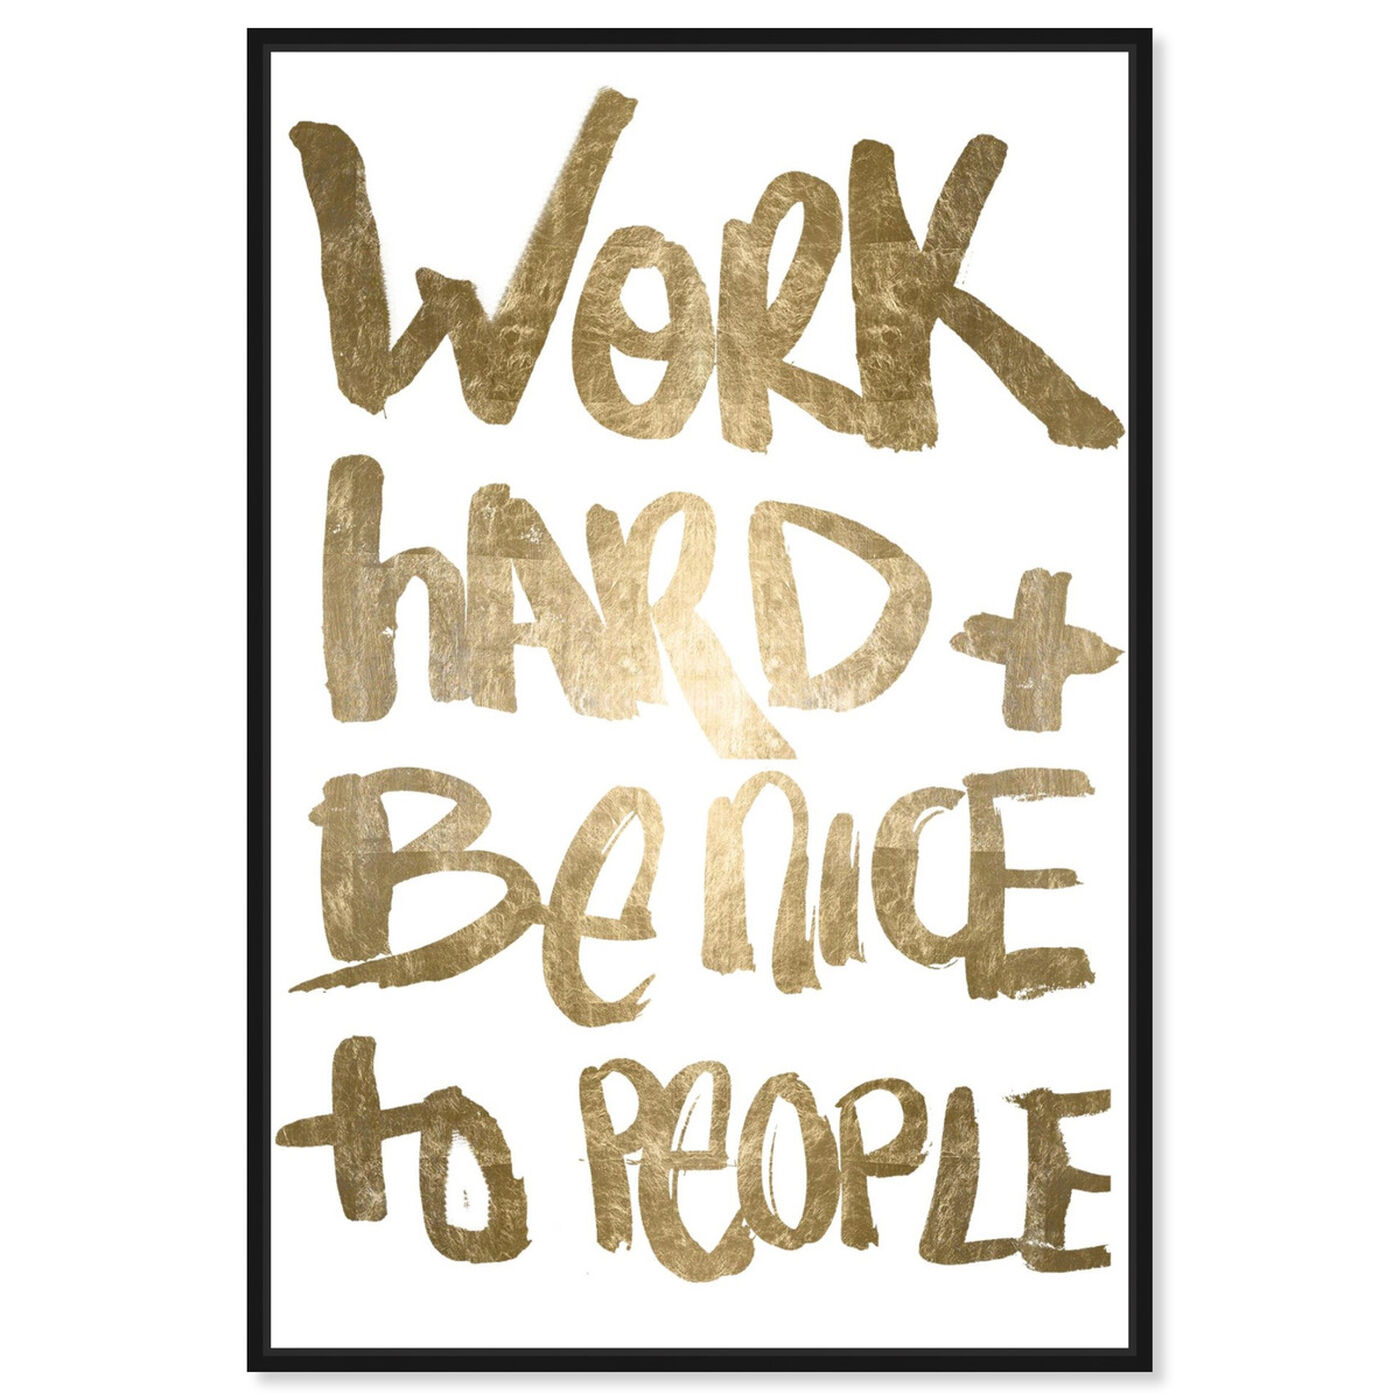 Front view of Work and Be Nice featuring success and entrepreneurial and work motivation art.